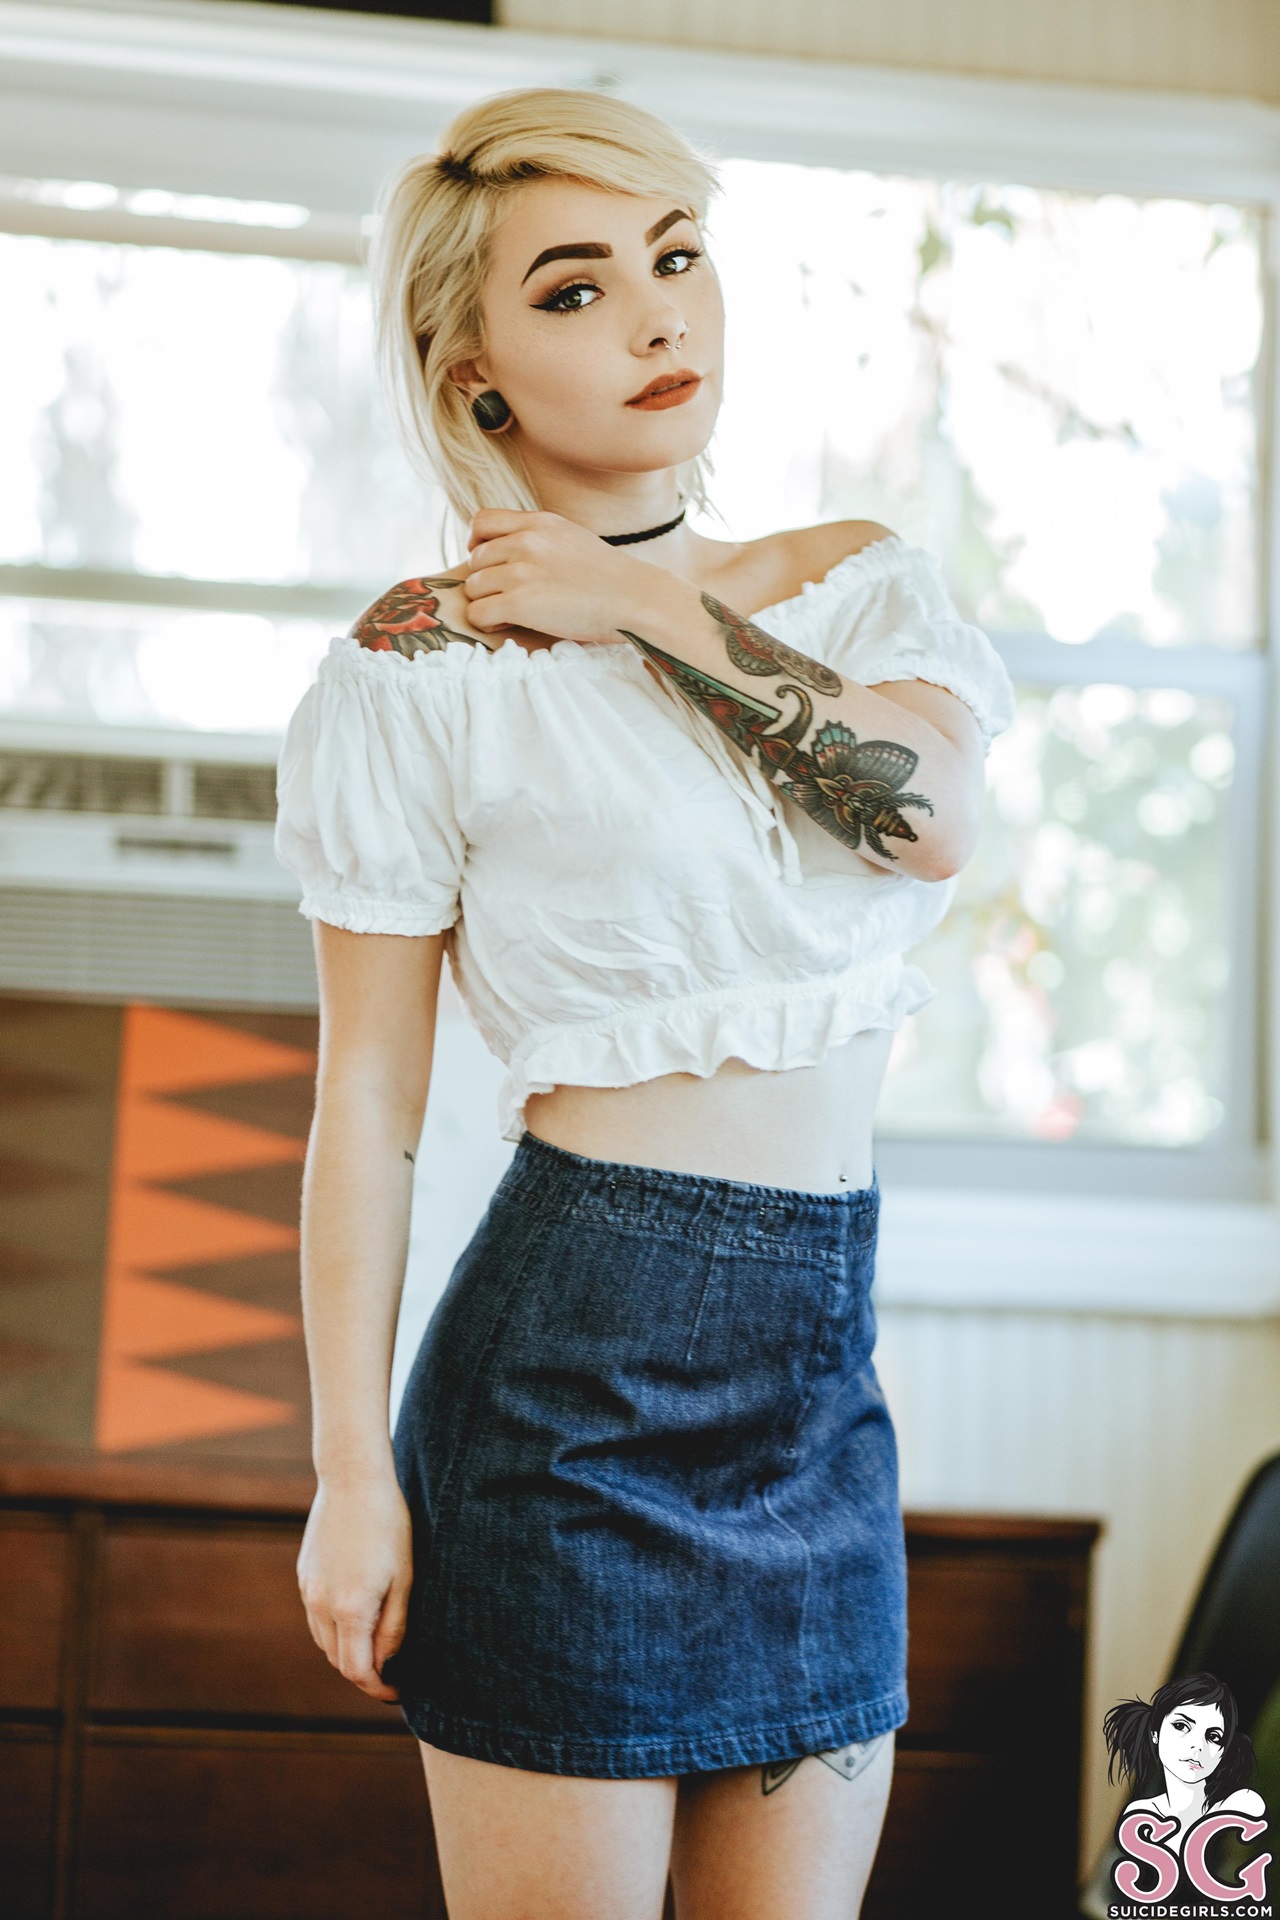 Blonde White Tops Women Indoors High Waisted Skirt Jeans Tattoo Looking At Viewer Necklace Red Lipst 1280x1920